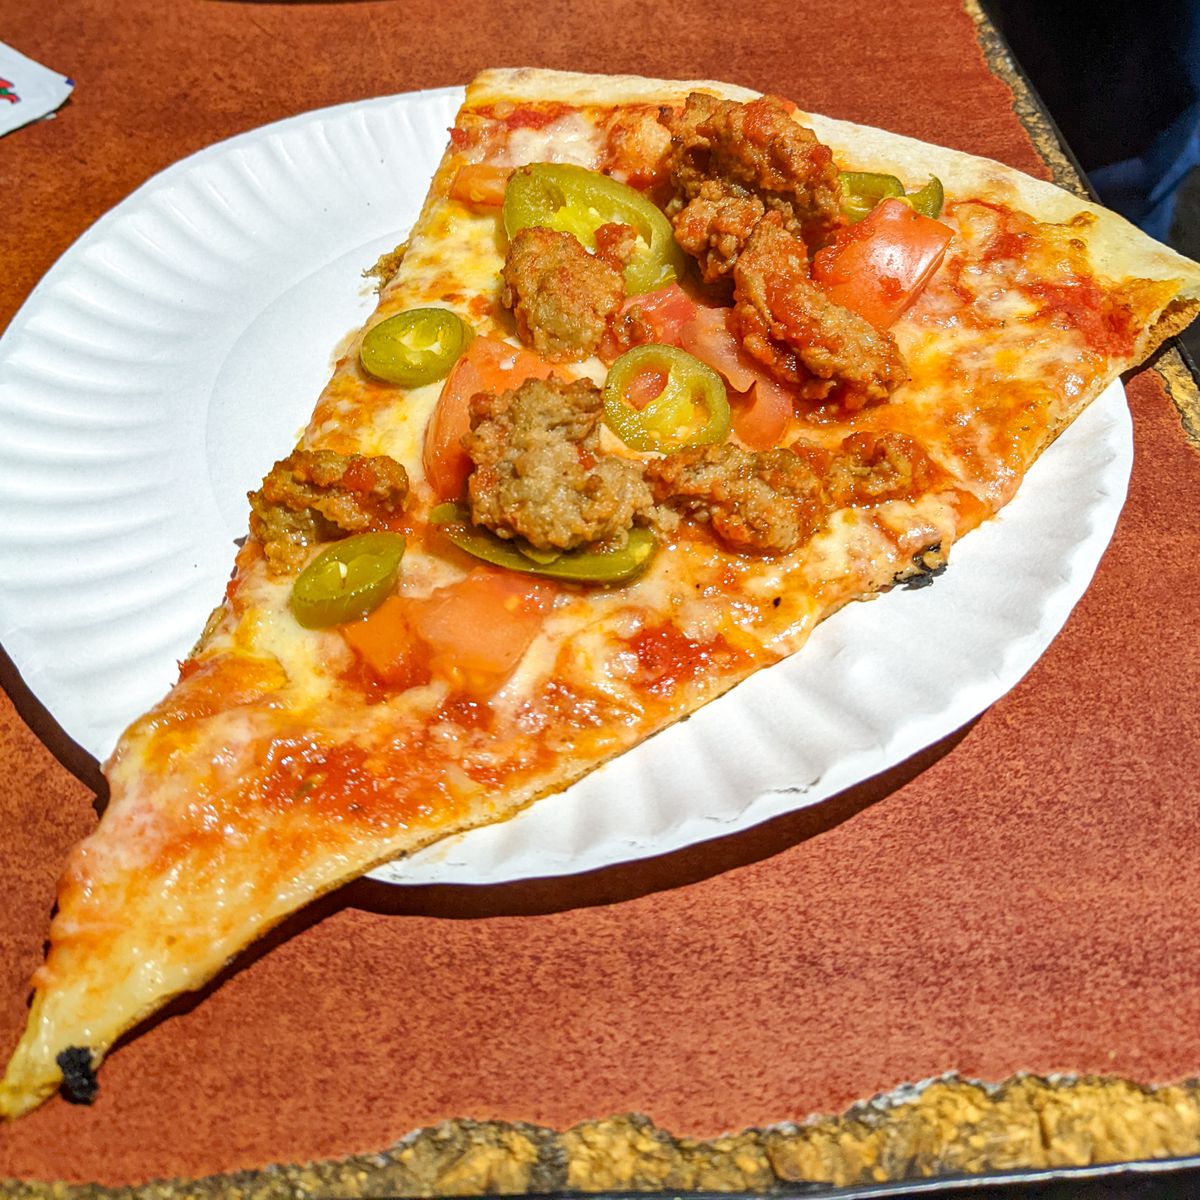 Pizza slice with meatball, jalapenos, and tomatoes with cheese and red sauce on a paper plate.